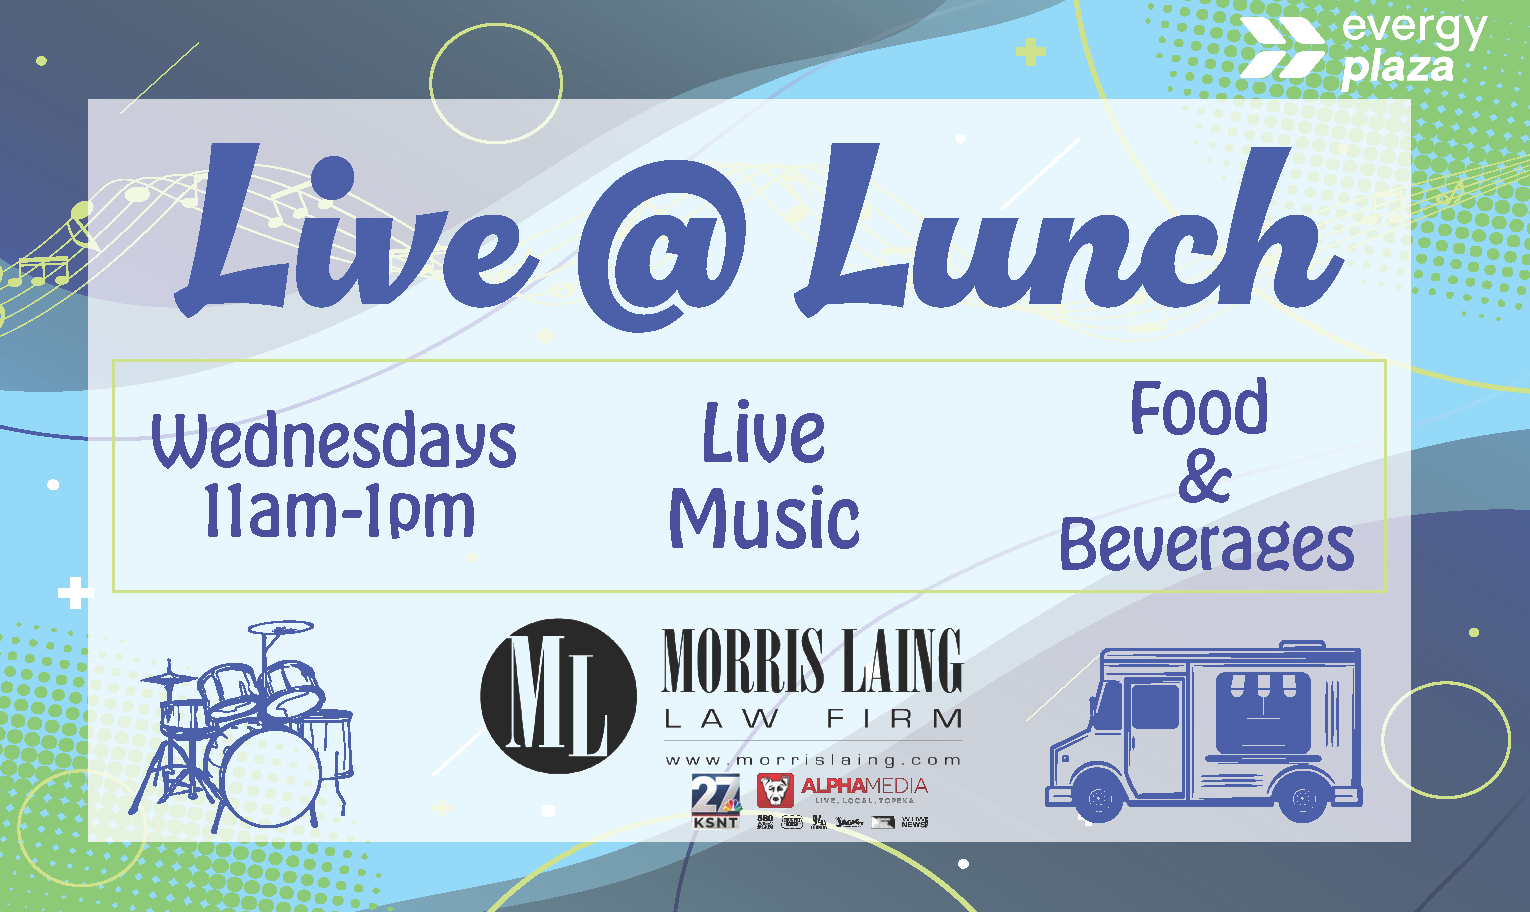 <h1 class="tribe-events-single-event-title">Evergy Plaza Live @ Lunch Wednesdays!!</h1>